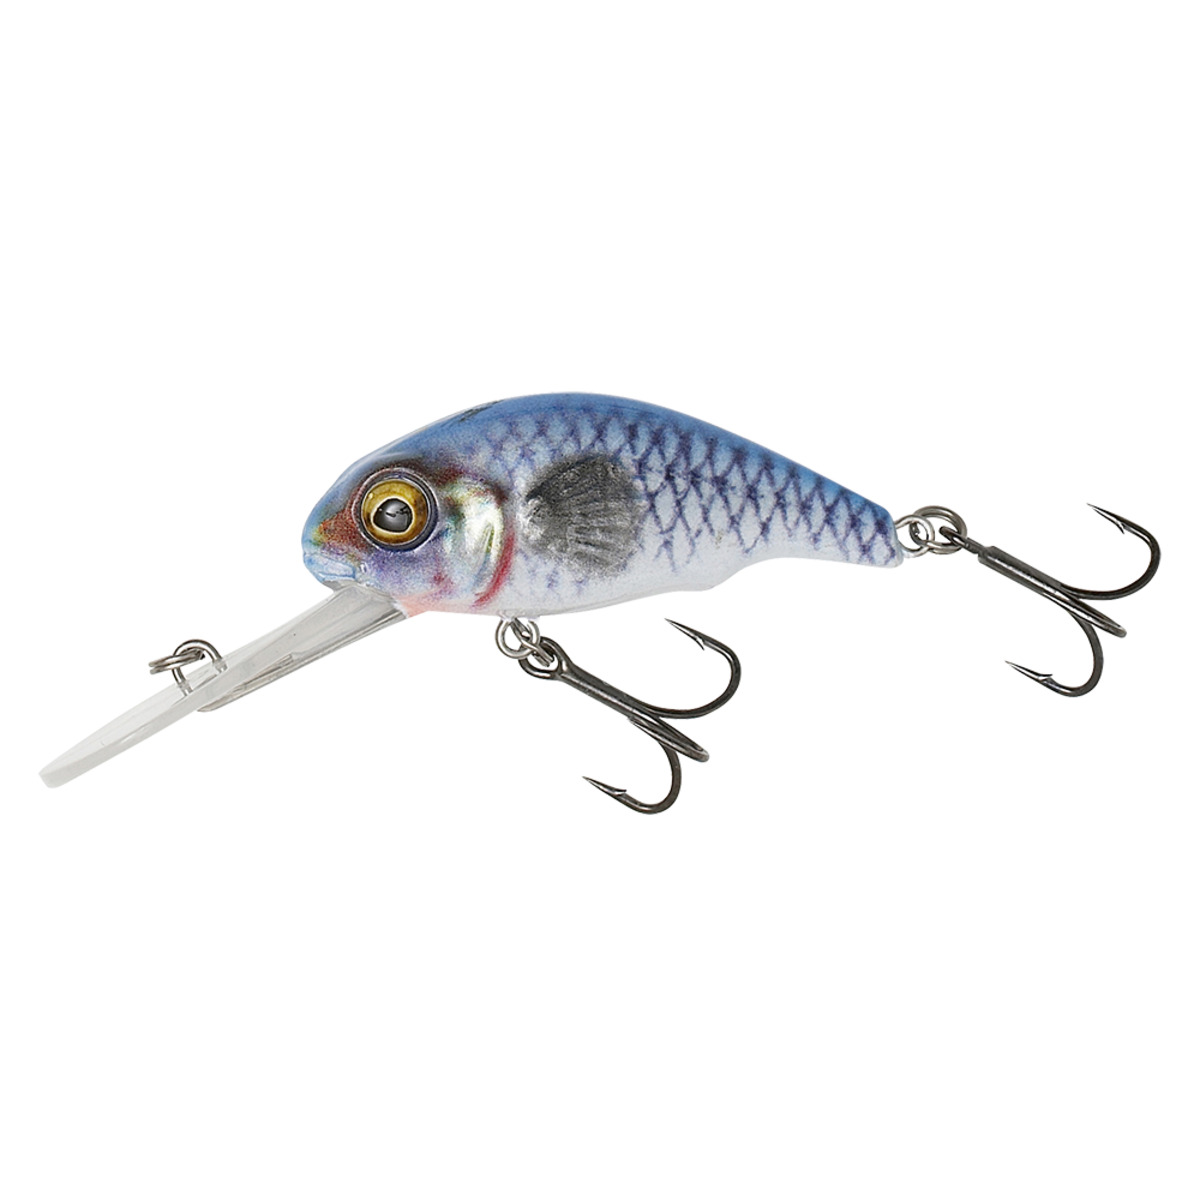 Savage Gear 3d Goby Crank Bait 5cm 7g Floating - BLUE/SILVER